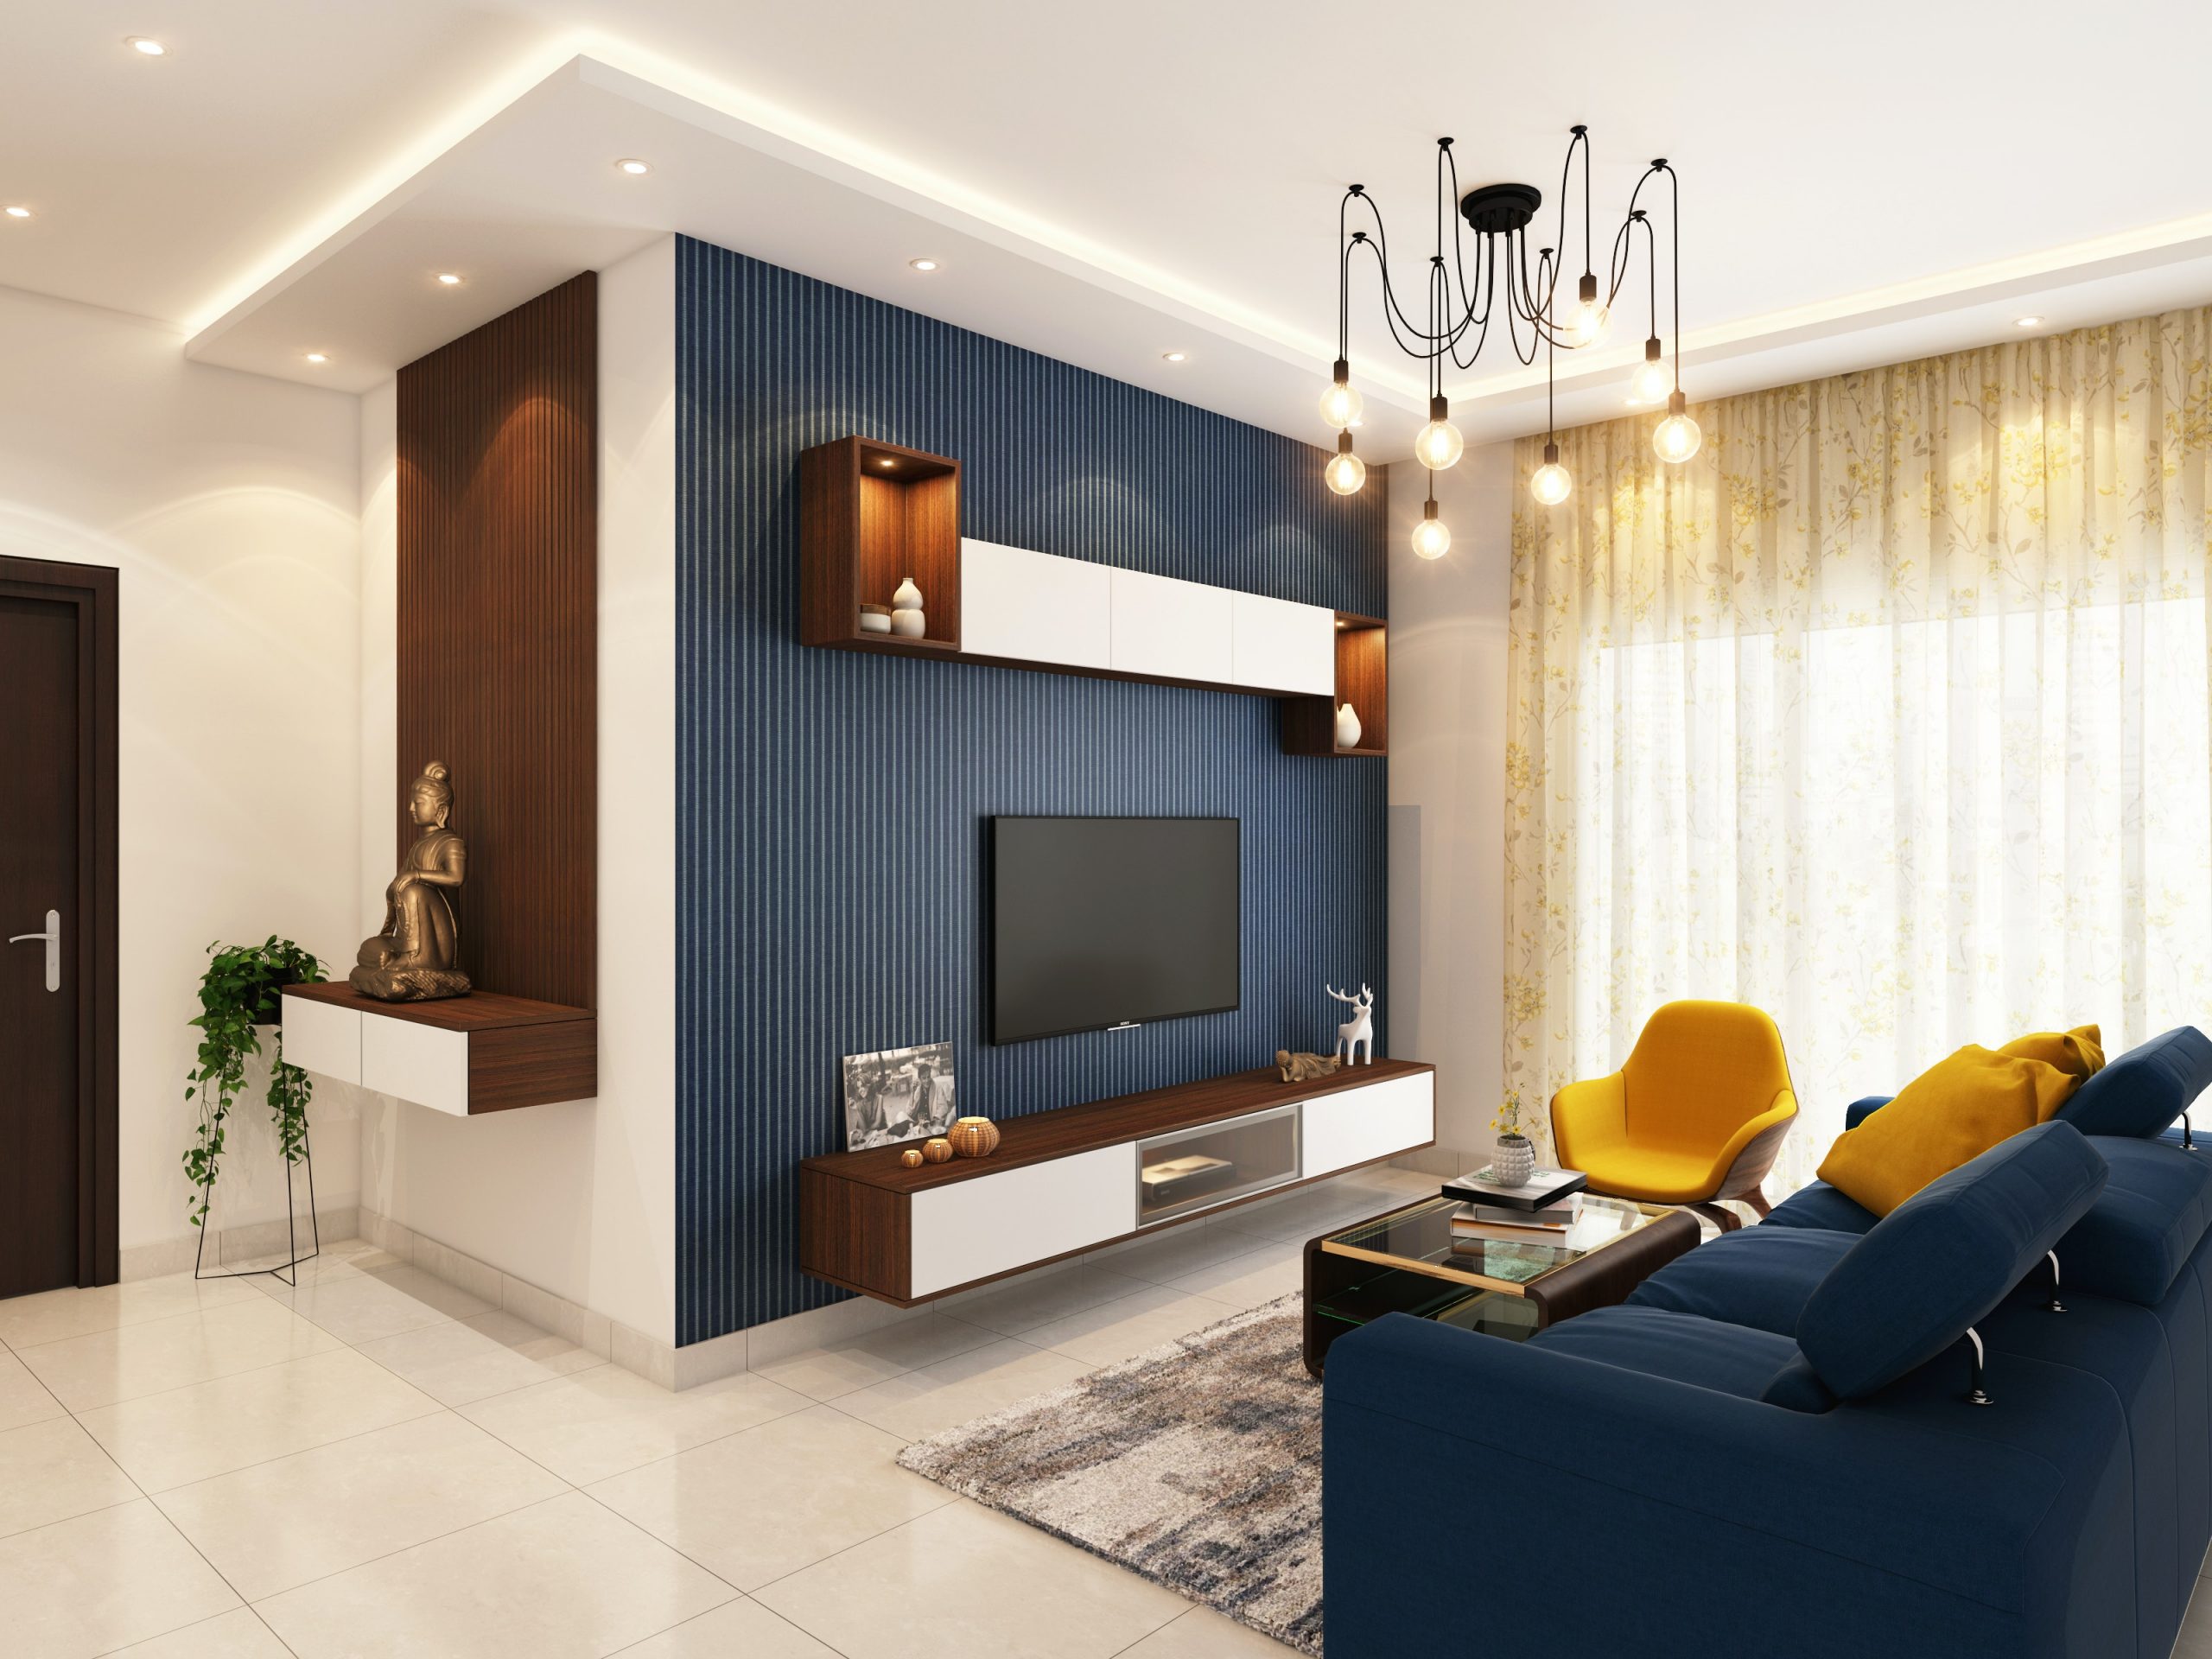 Comfortable relaxation area in the living room – how to arrange it?